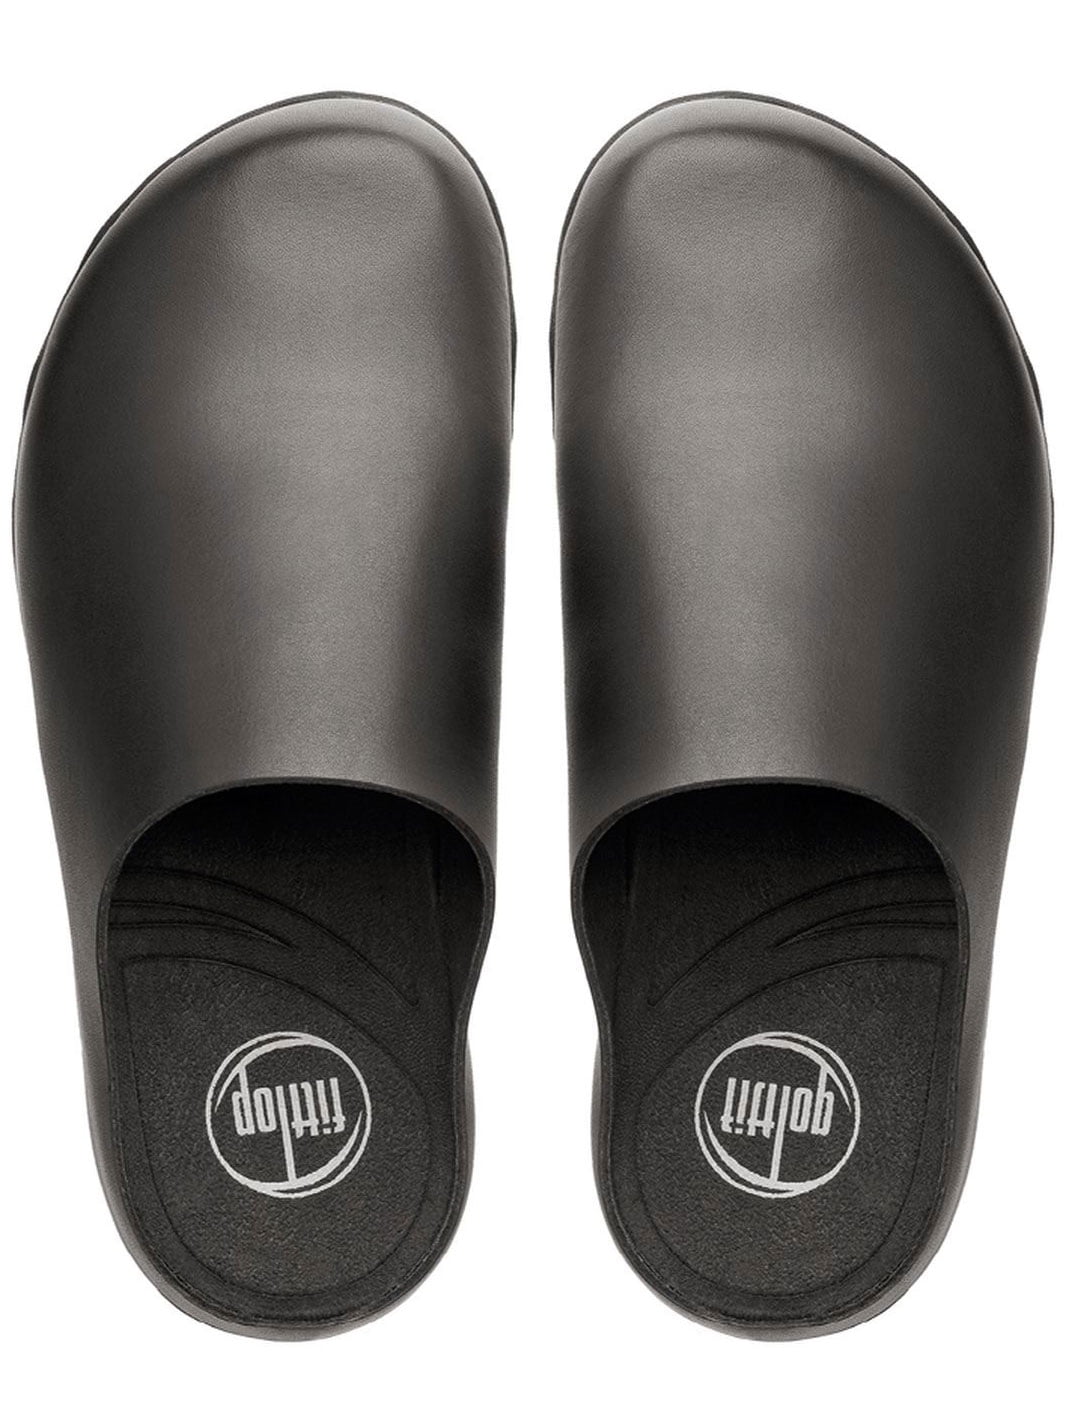 fitflop cloggs